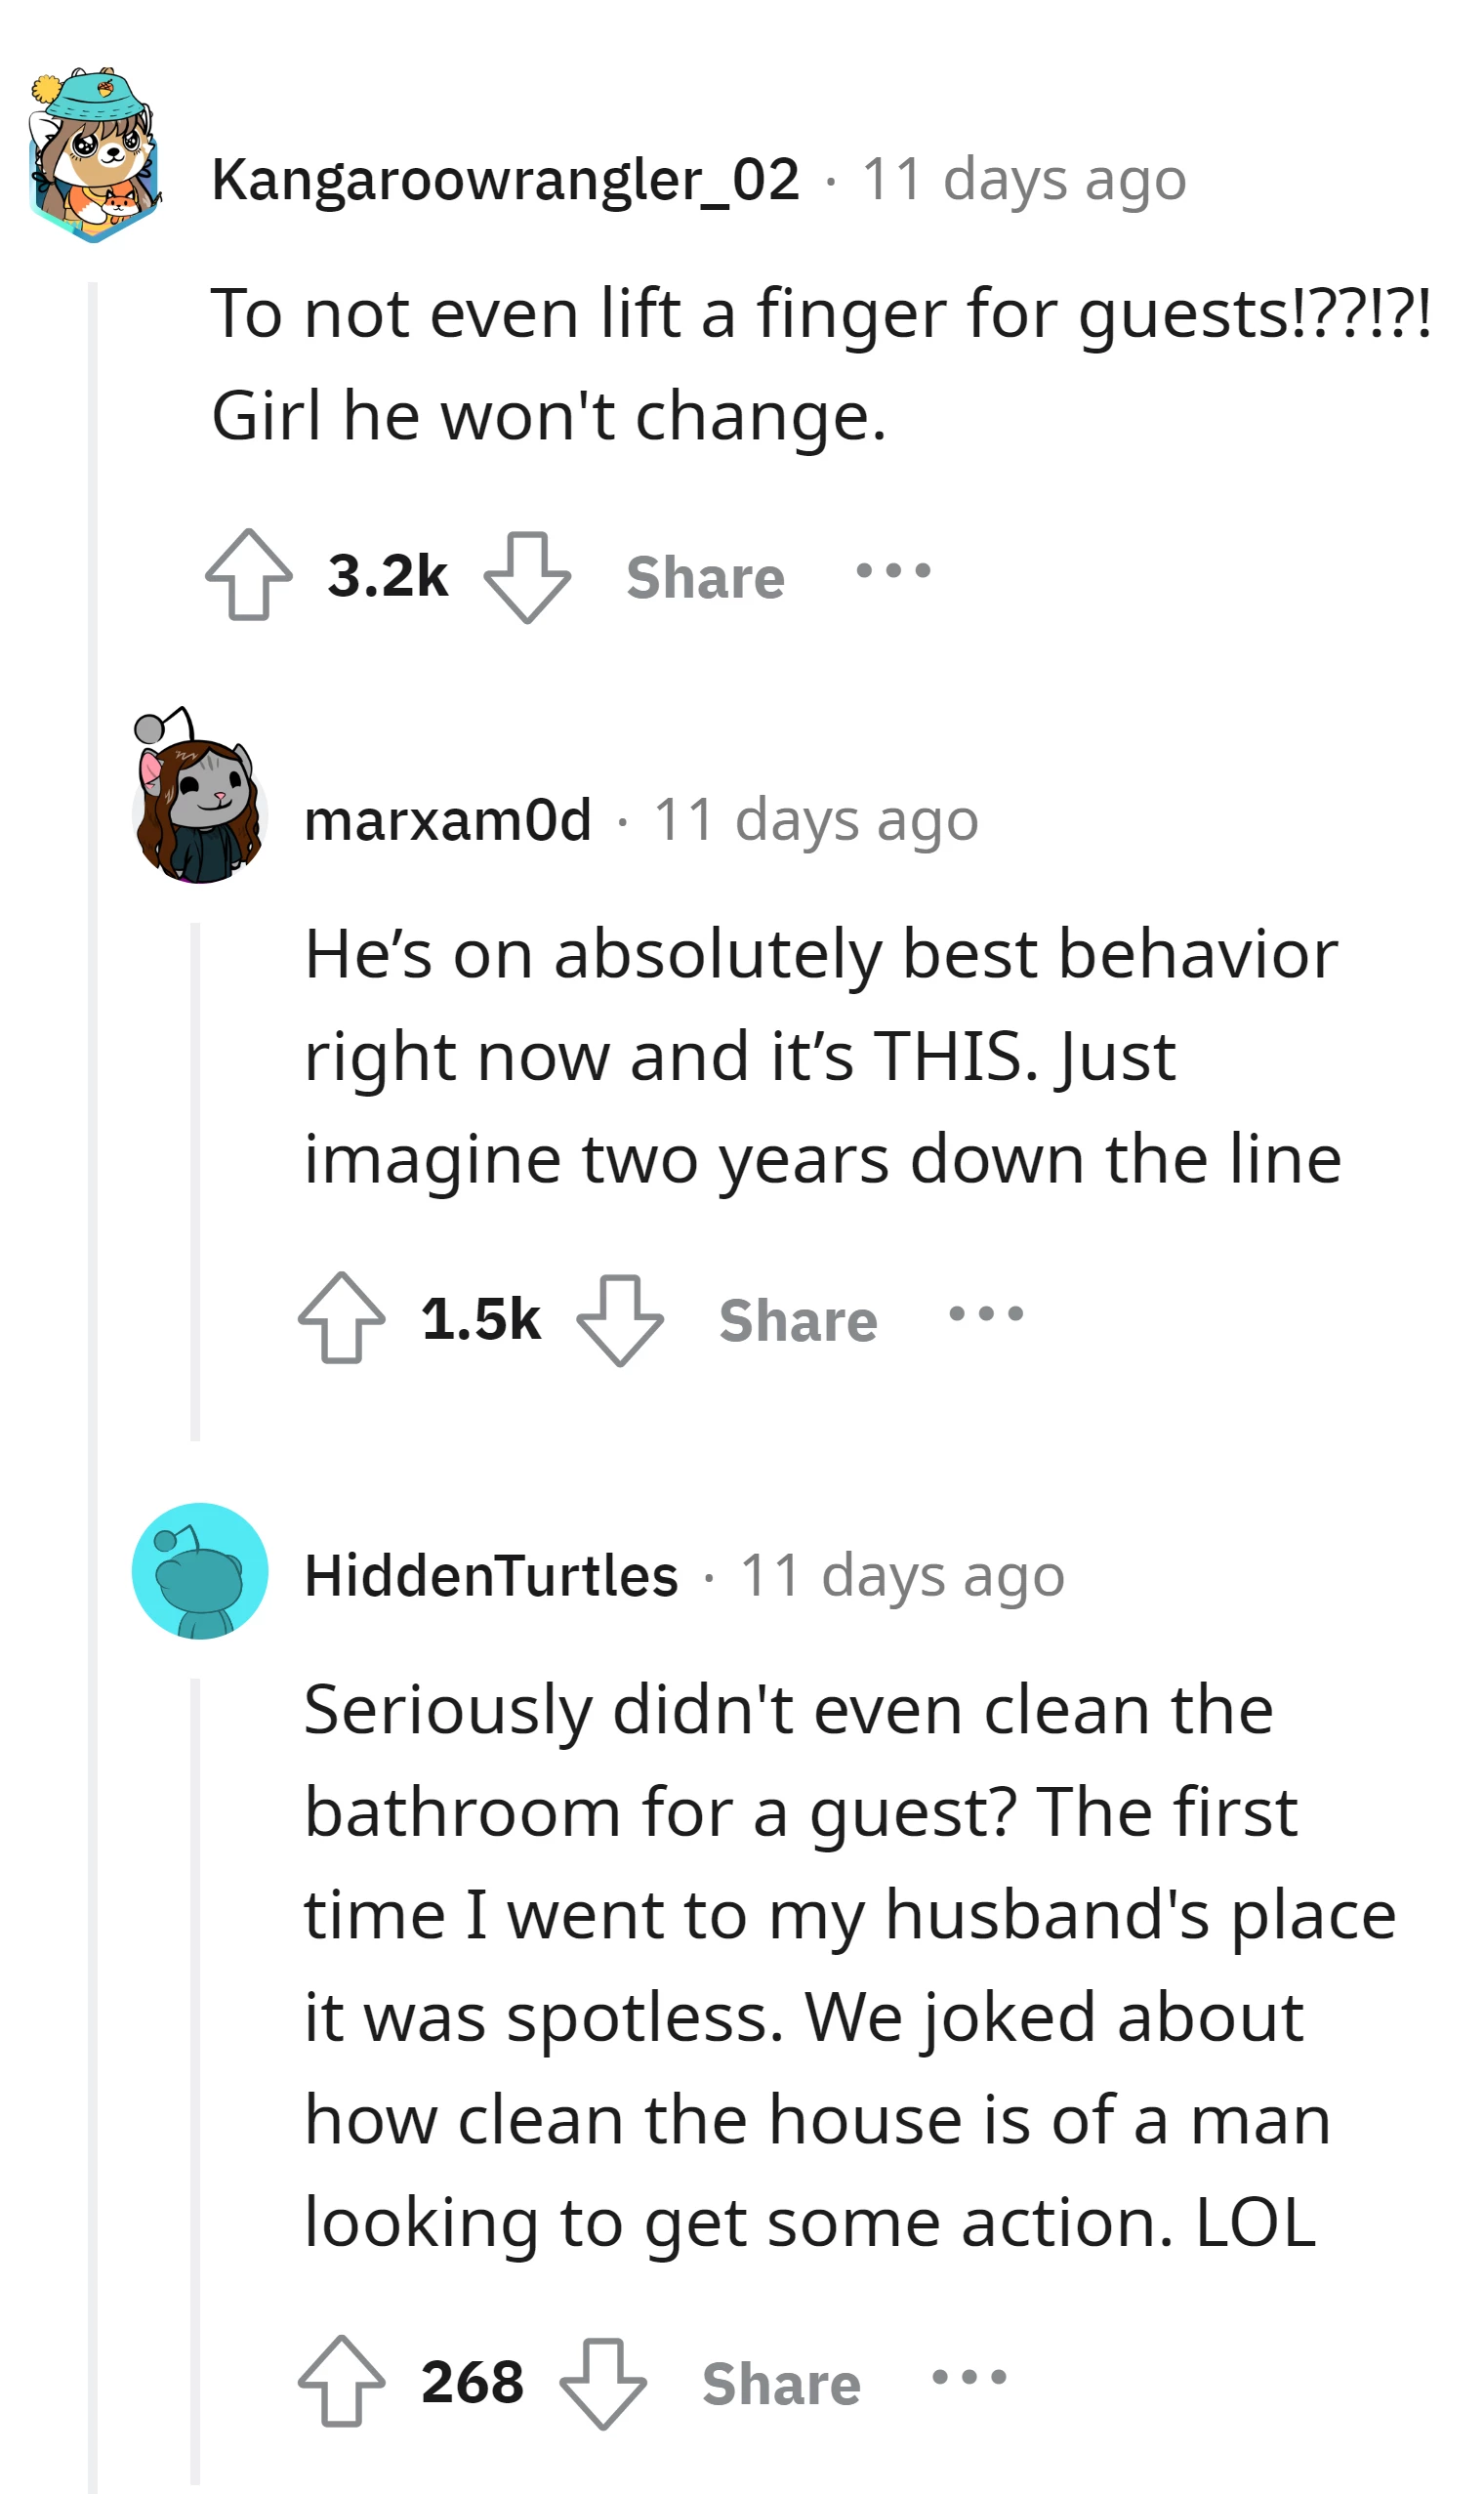 Commenters express skepticism about the guy's behavior